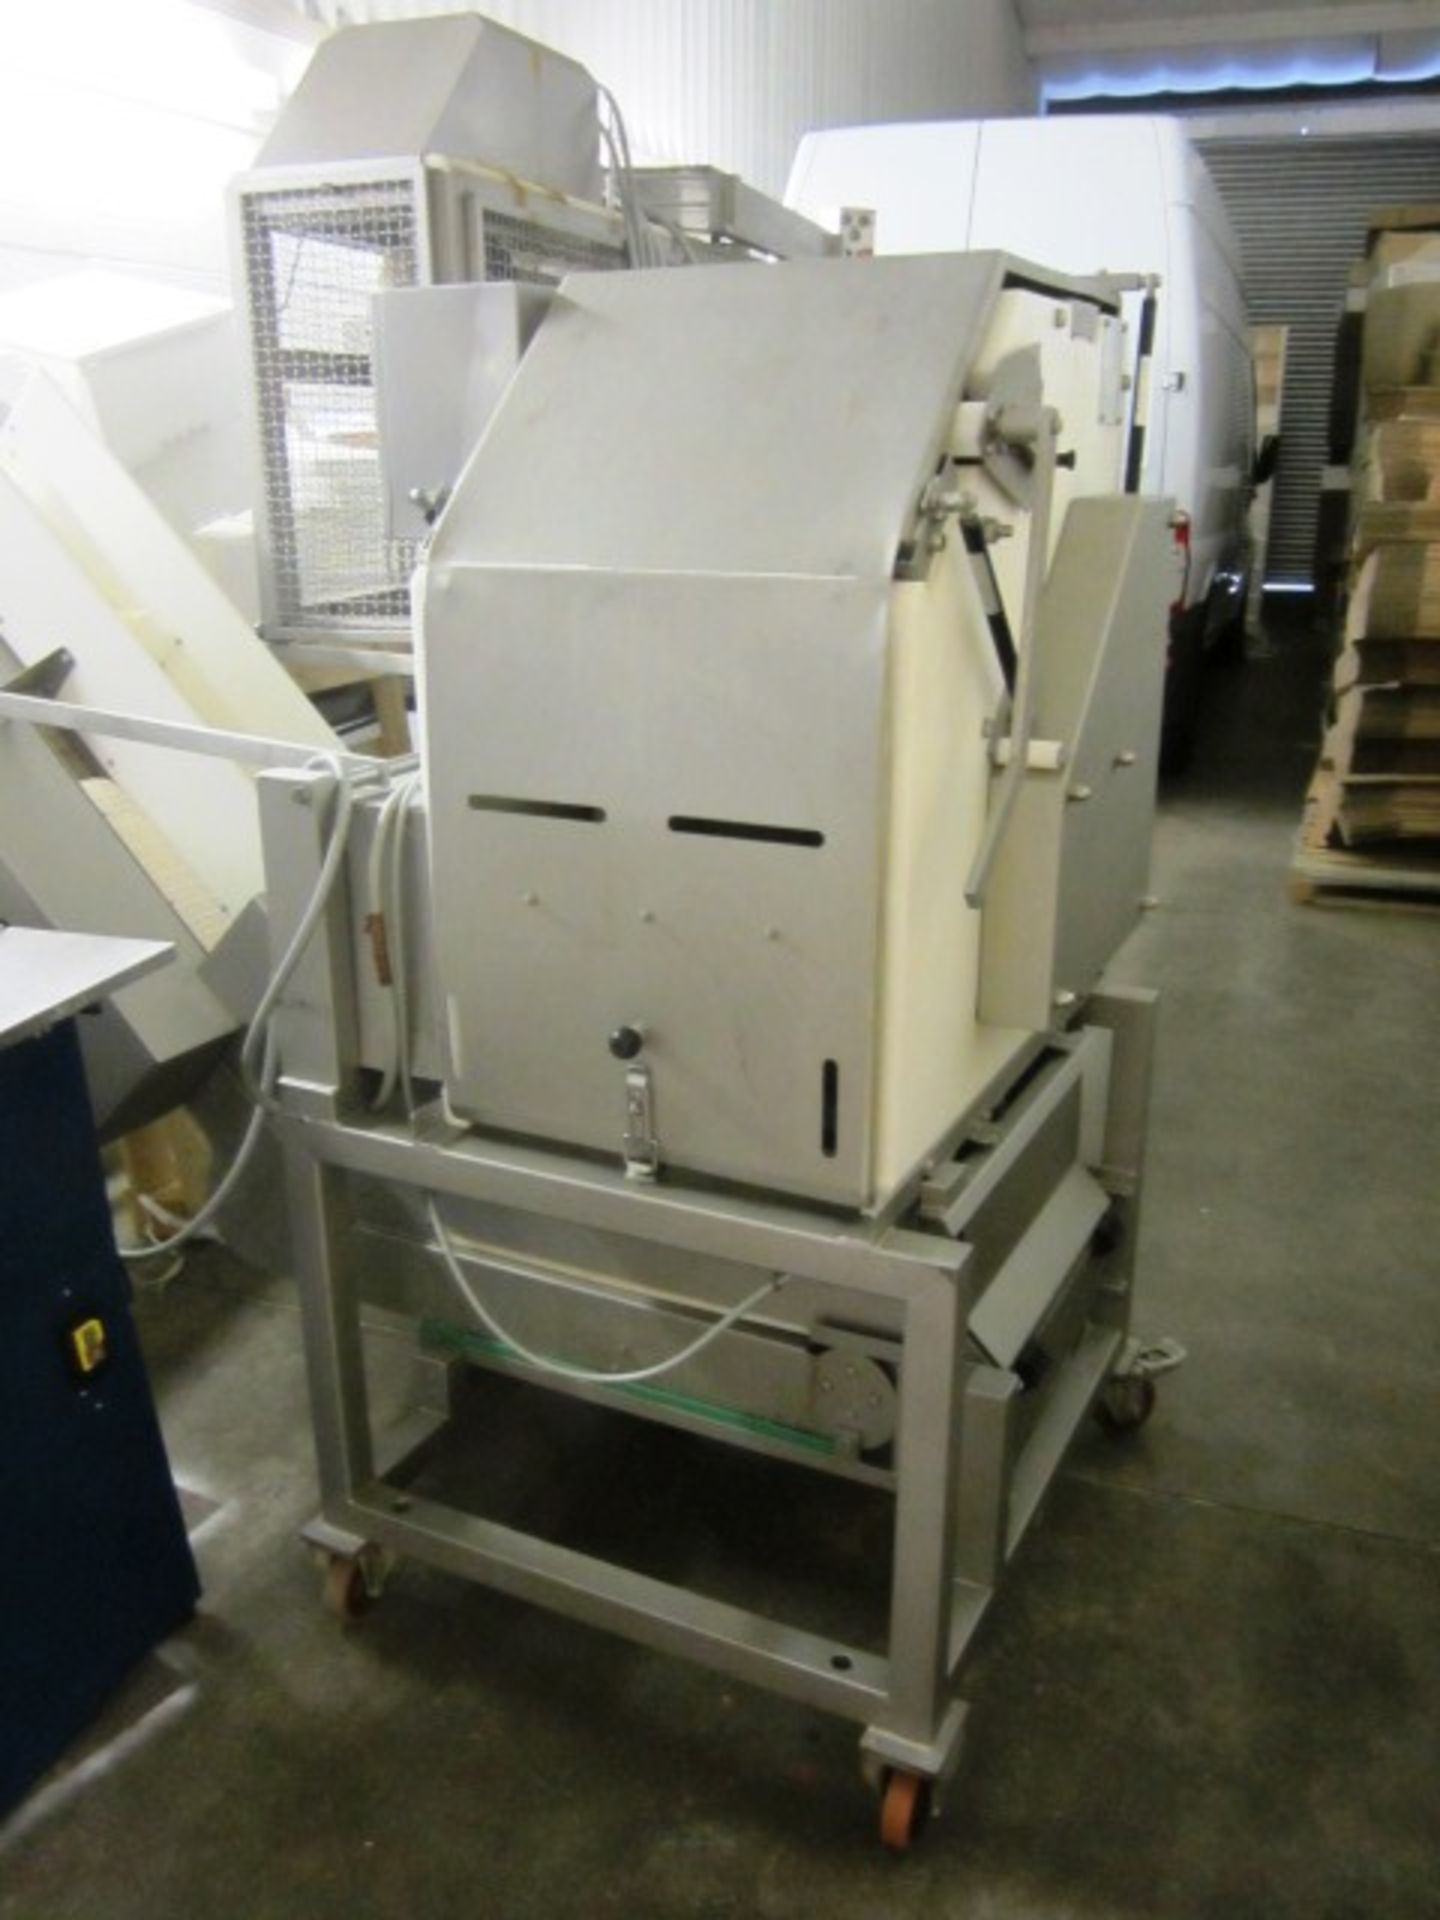 Steen Stainless Steel mobile chicken breast skinning machine, type ST 650 / 3010A (2010) with - Image 6 of 11